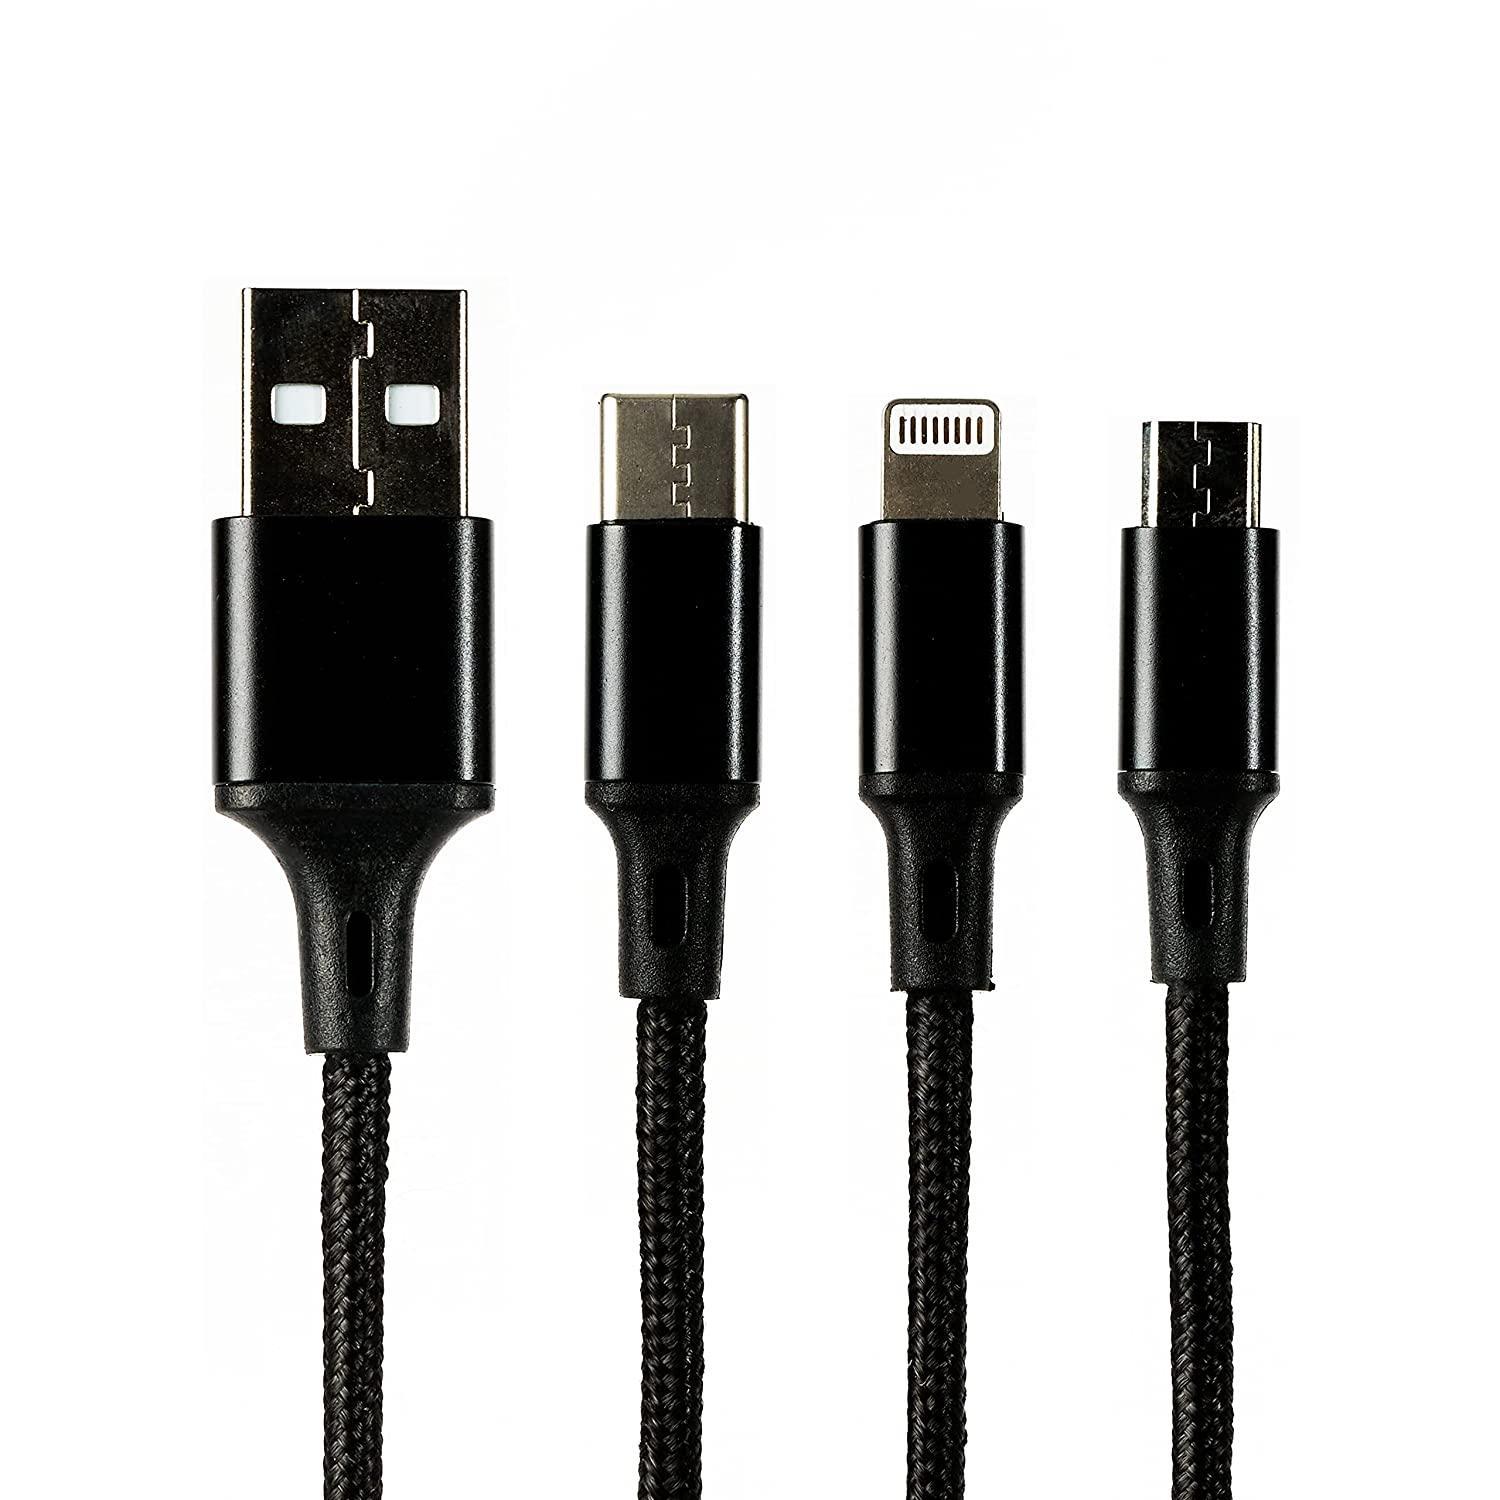 High Quality Wire 3 in 1 Cable and Charging Cable Usb for Android Micro+iPhone+Type-C Usb - Black